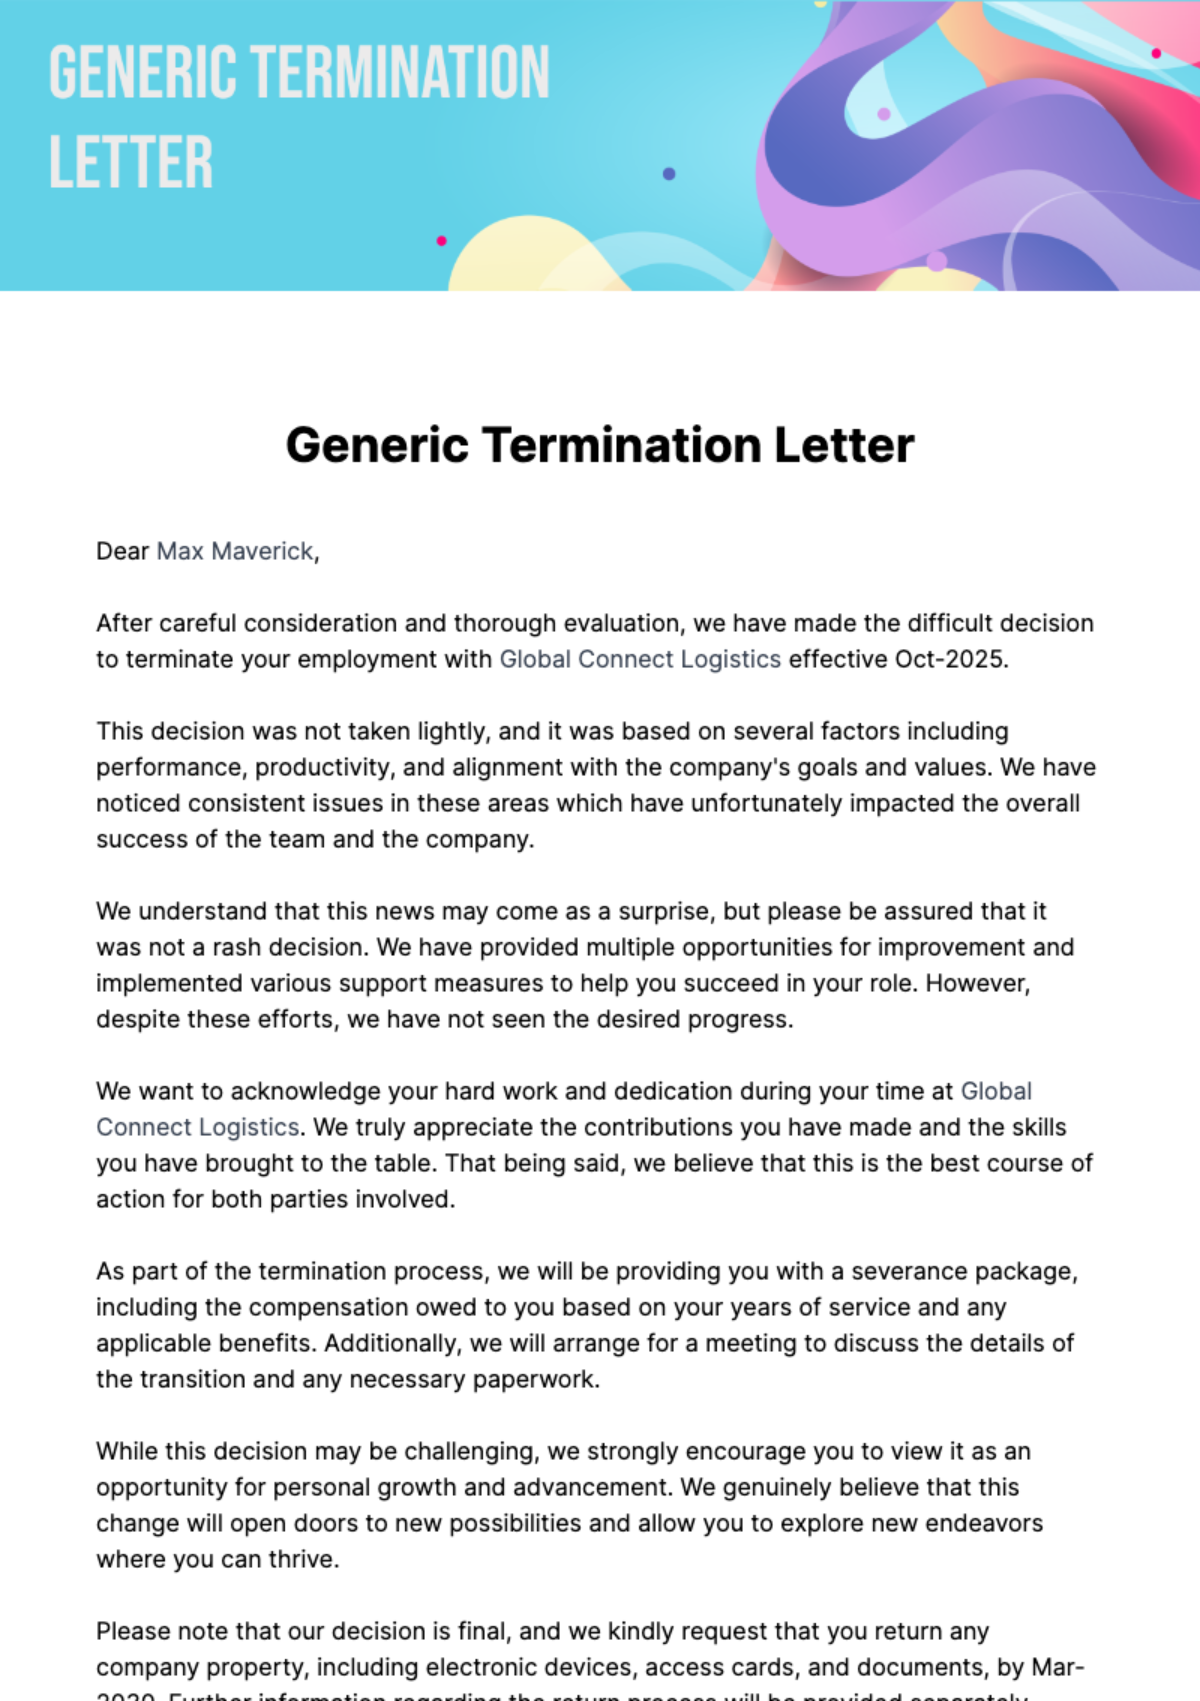 Free Generic Termination Letter Template